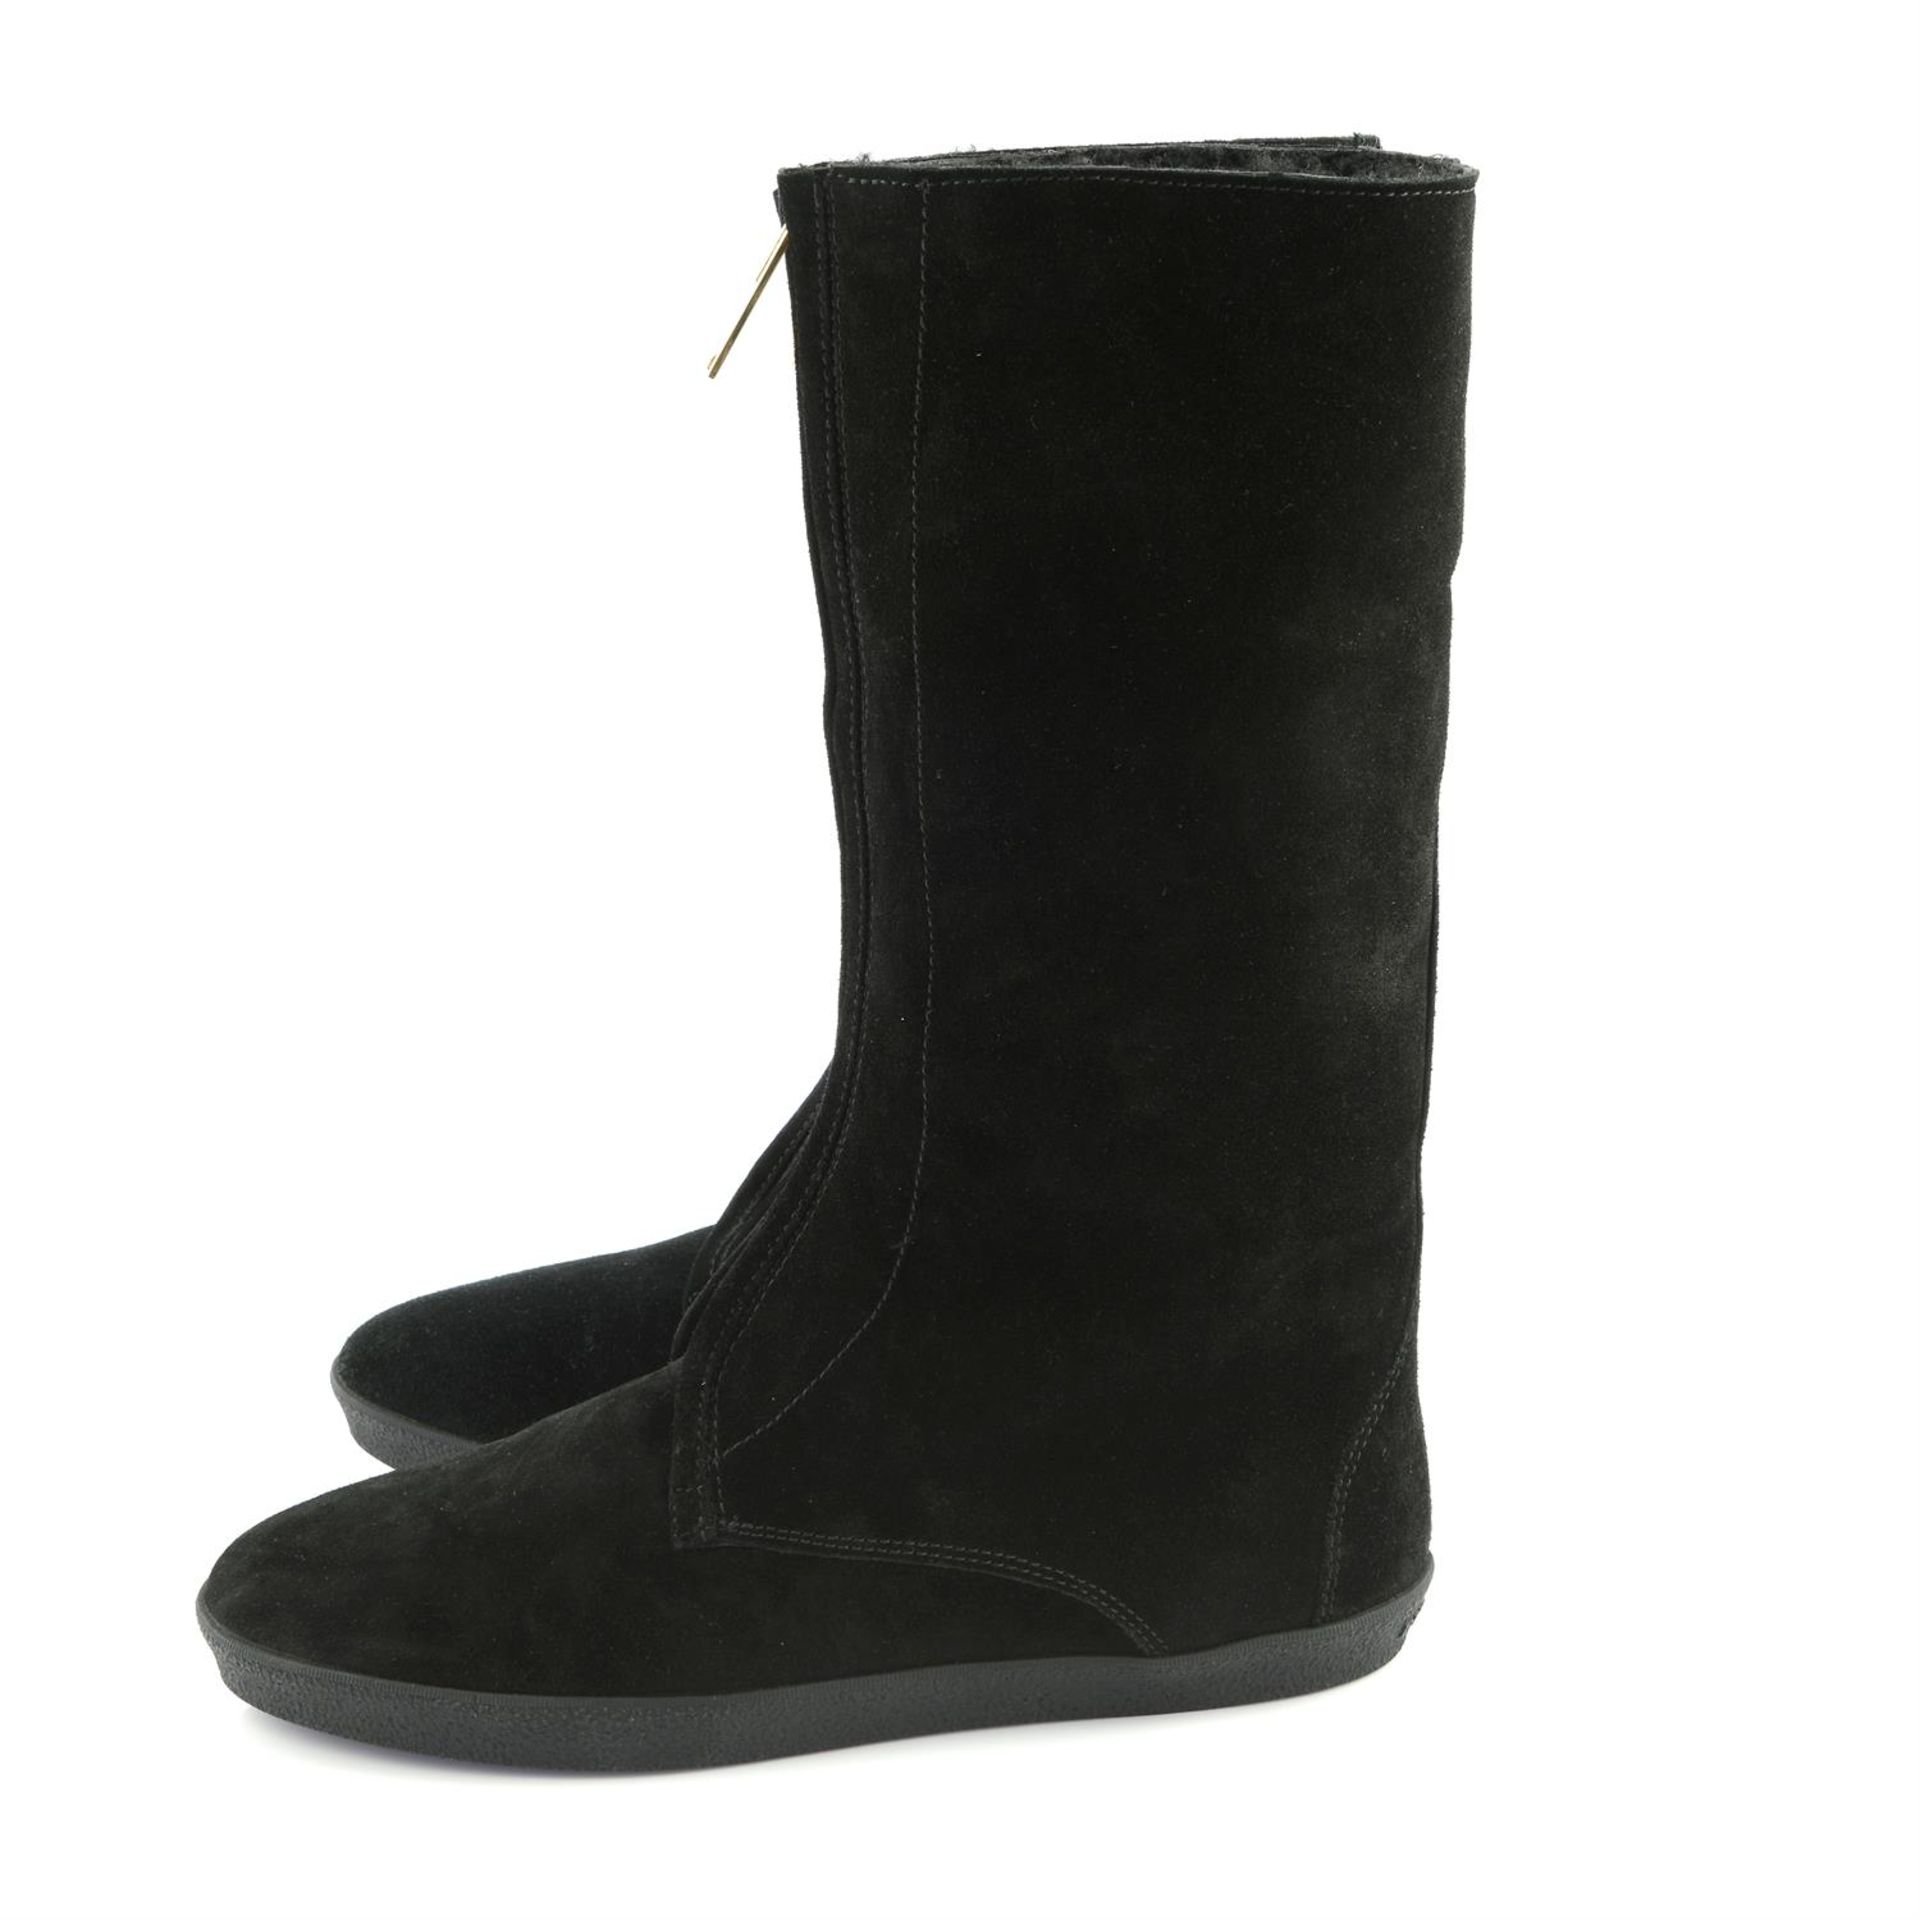 BURBERRY - a pair of black suede Stanmore fold over snow boots. - Bild 2 aus 4